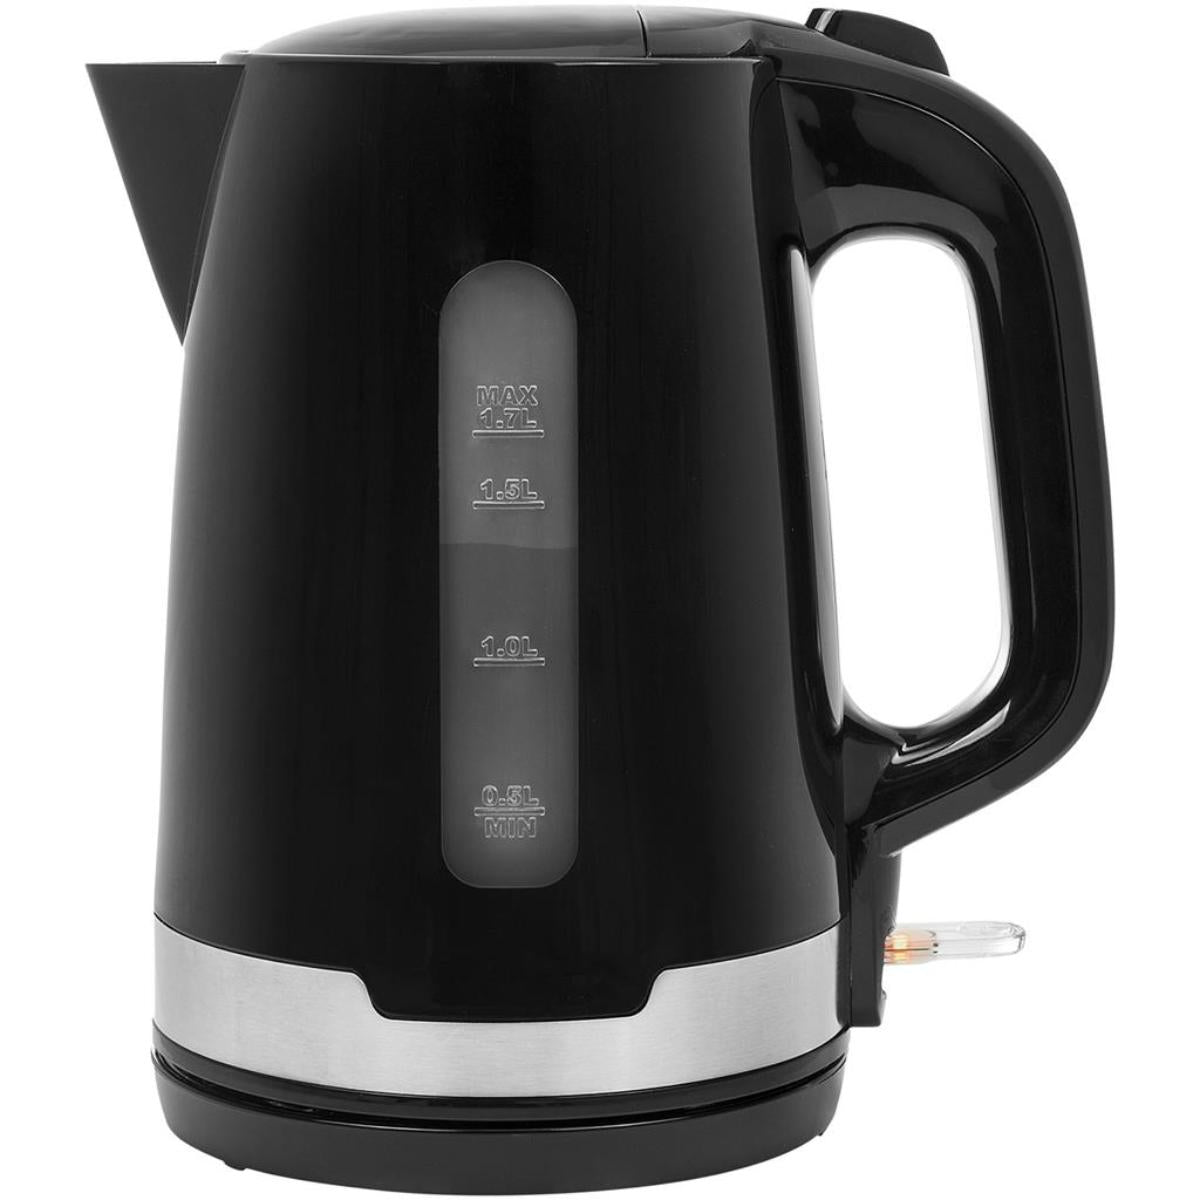 01.236030.09.001/jug kettle large capacity of 1.7 L luxurious desigh high gloss finishing and stainl 2200 / 1.7L / black